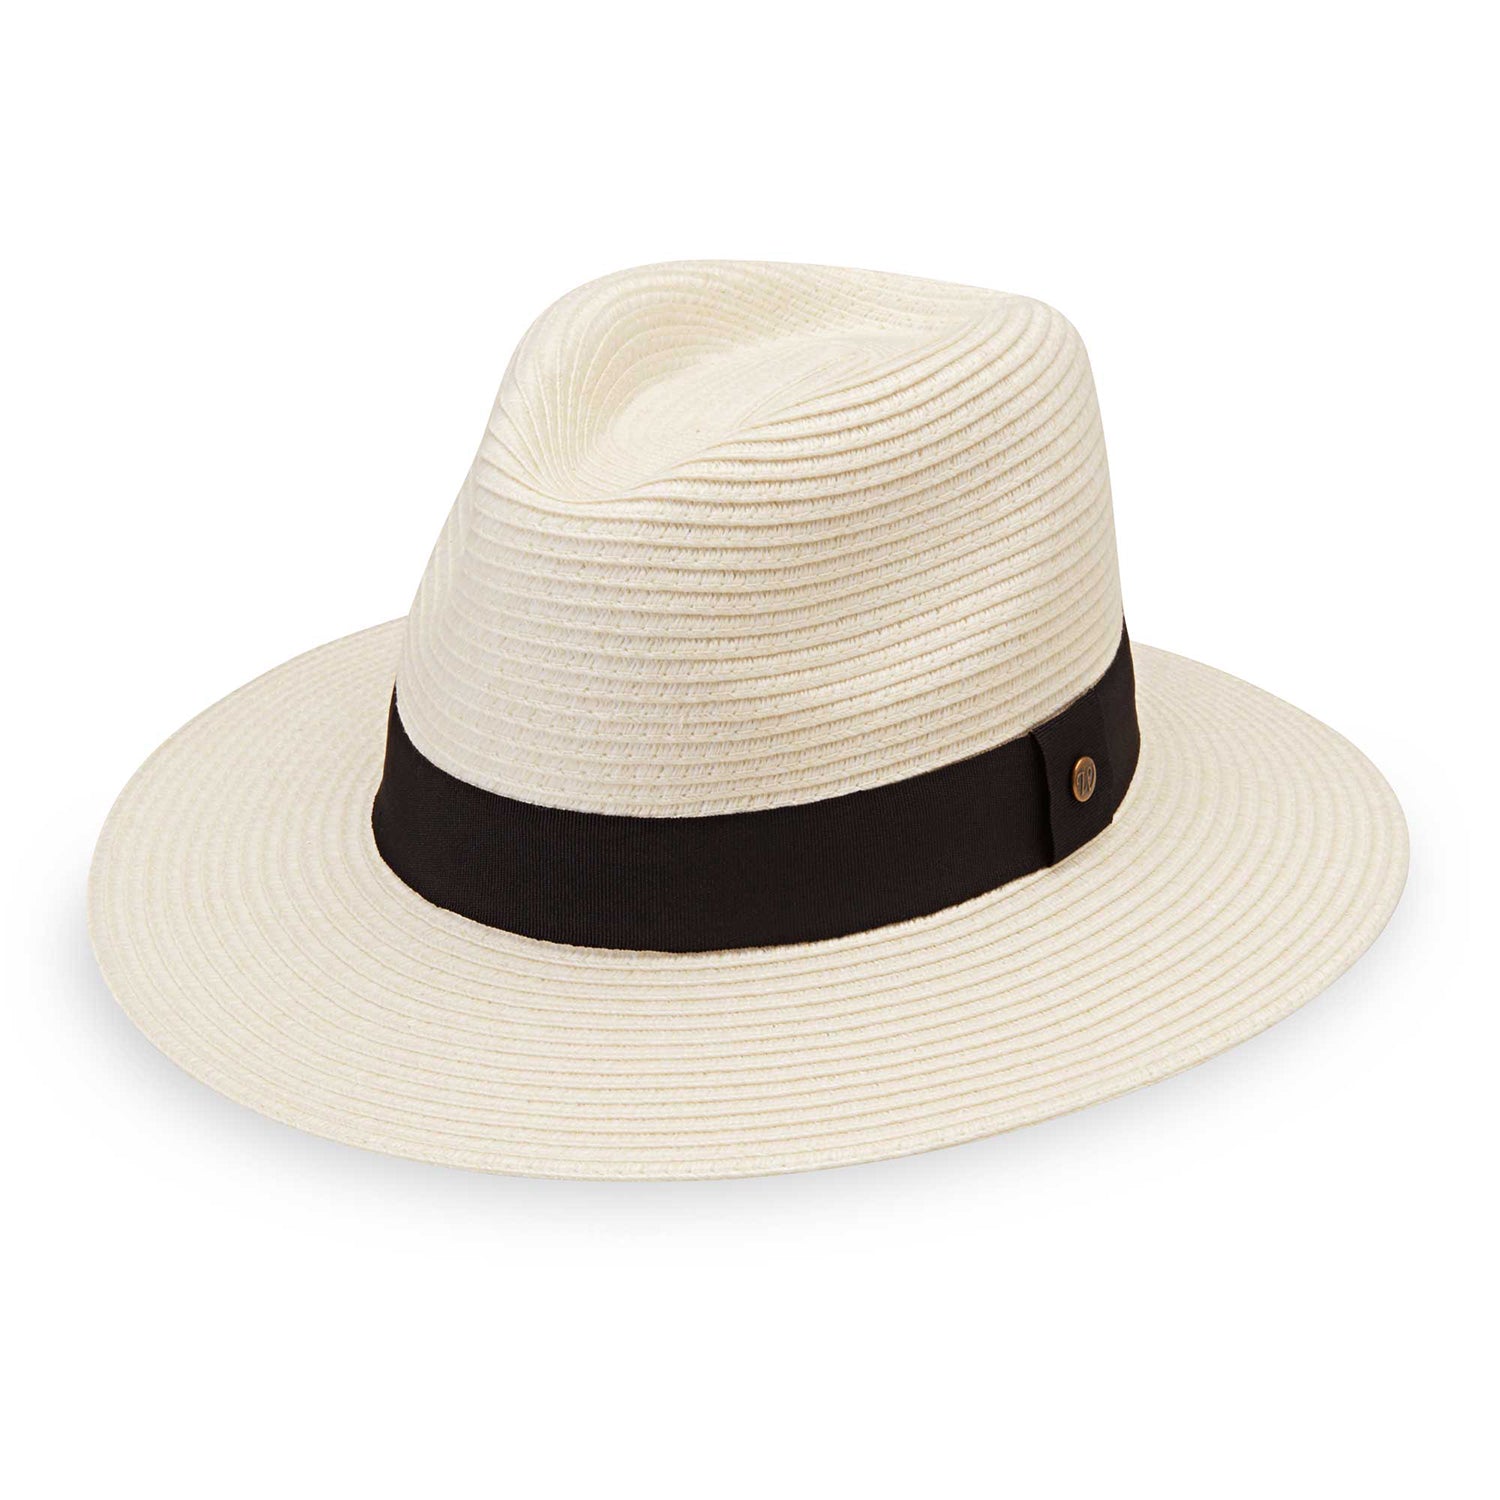 Featuring Ladies' Petite palm beach summer sun cap by Wallaroo, featuring packable for travel